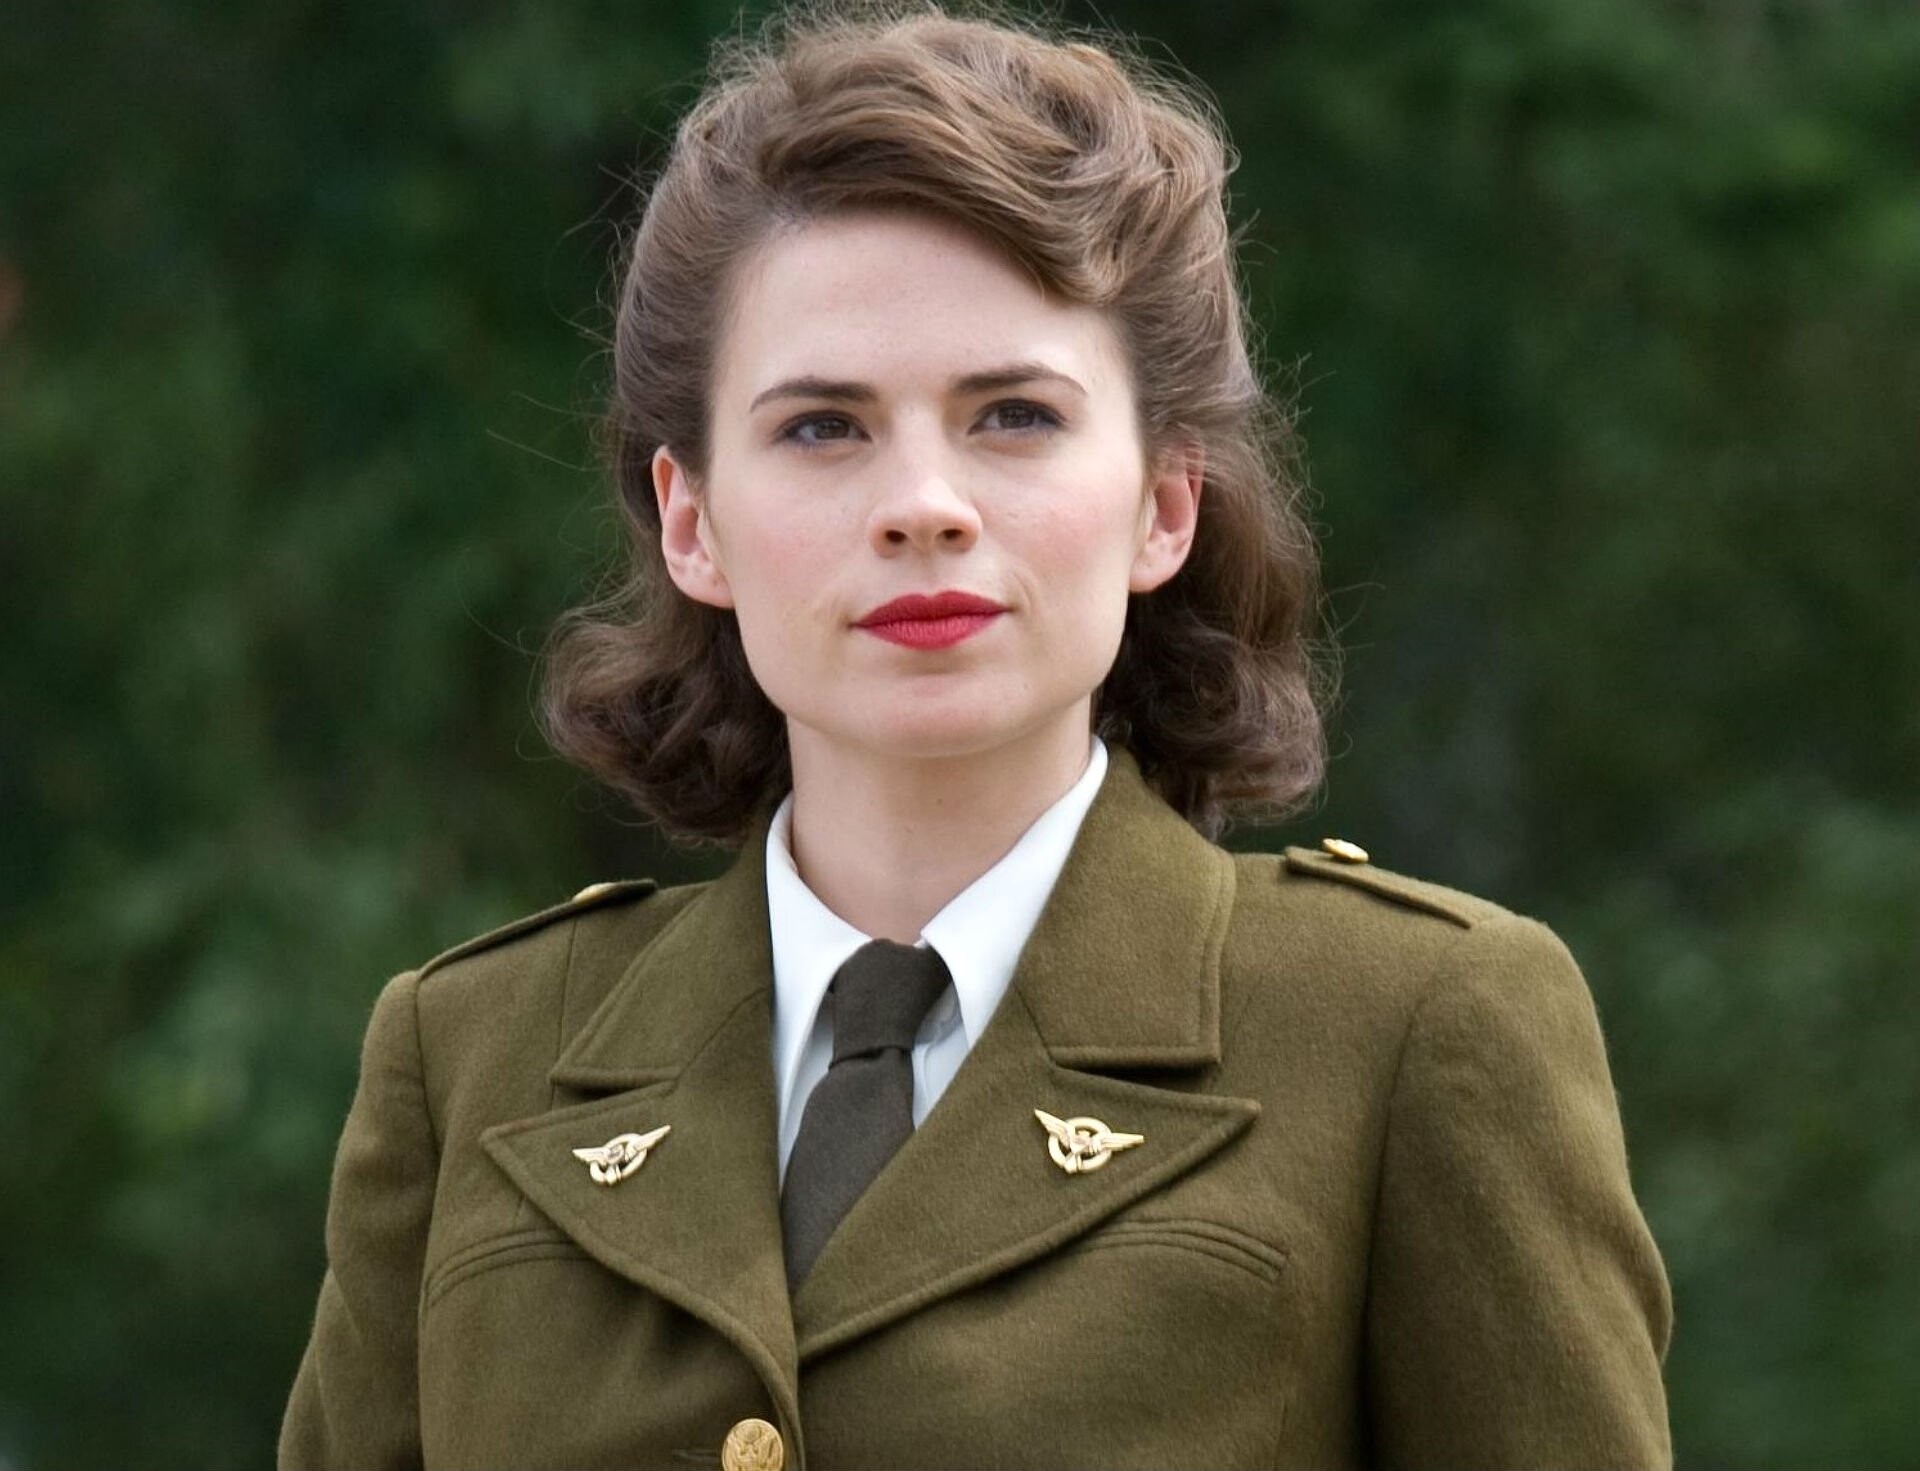 Hayley Atwell: British actress who portrayed Agent Peggy Carter in the 2011 superhero film Captain America: The First Avenger. 1920x1480 HD Wallpaper.